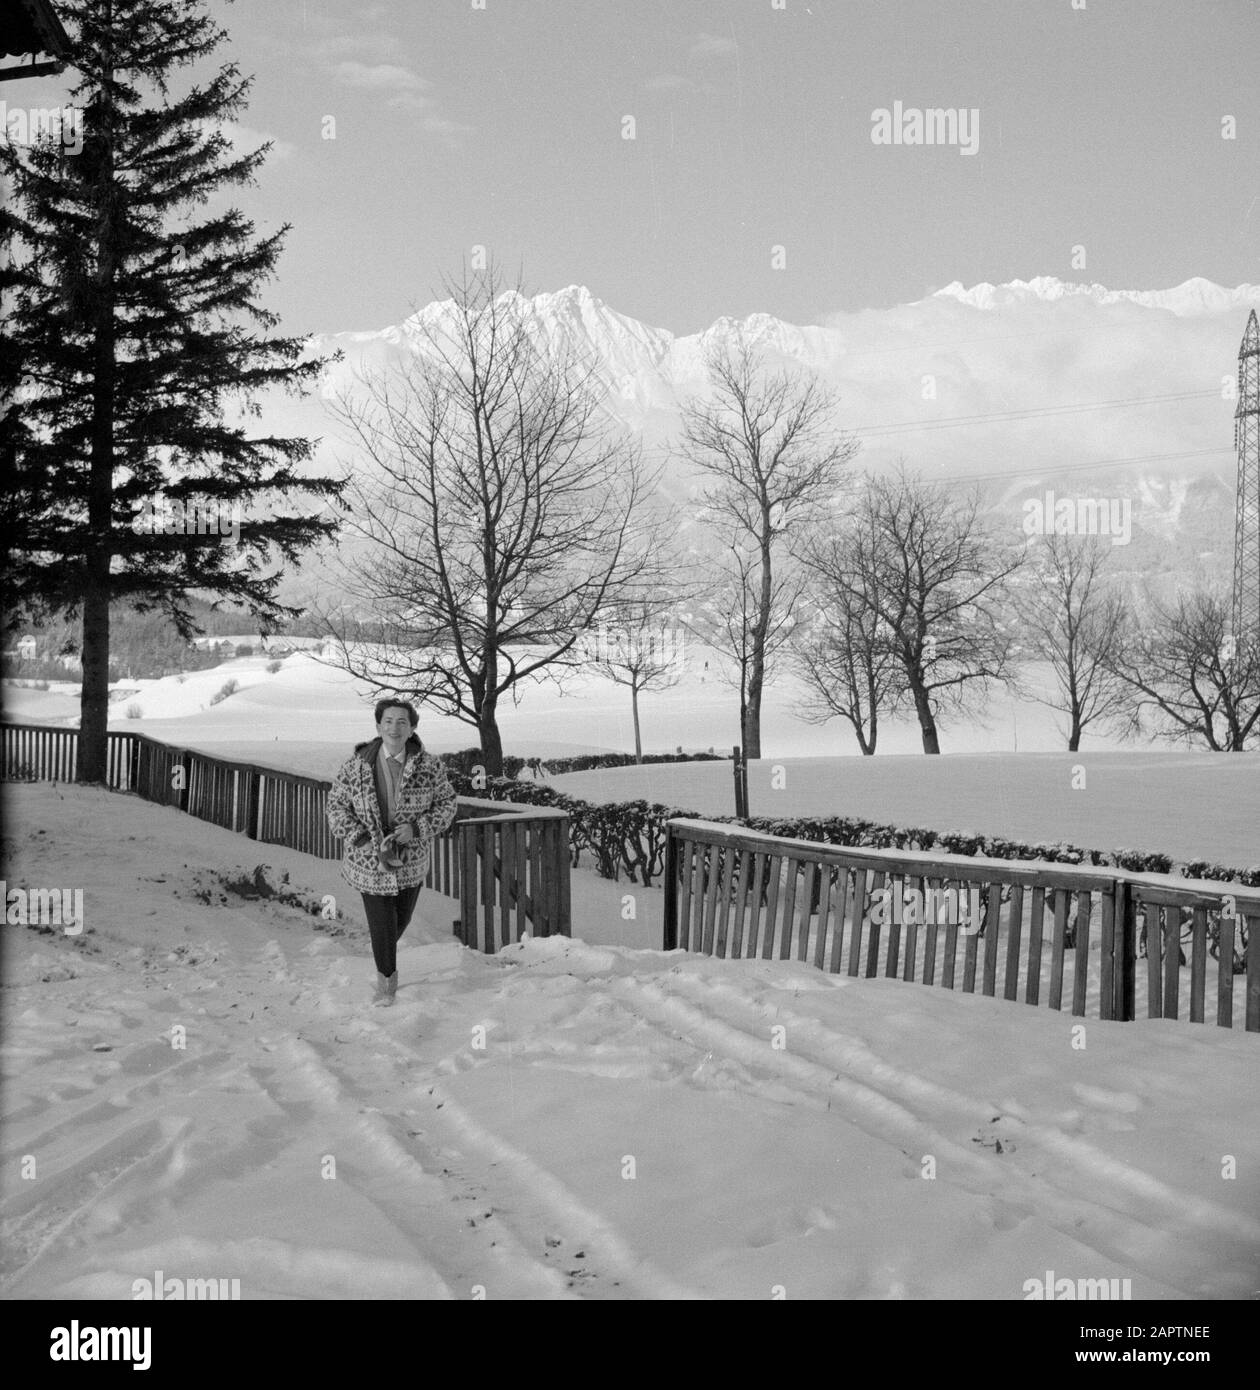 Winter in Tyrol  Hilde Eschen walks in the snow near Sistrans with in the background the Karwendel Mountains Date: January 1960 Location: Austria, Sistrans, Tyrol Keywords: mountains, landscapes, snow, holidays, hiking, winter Personal name: Echen, Hilde Stock Photo